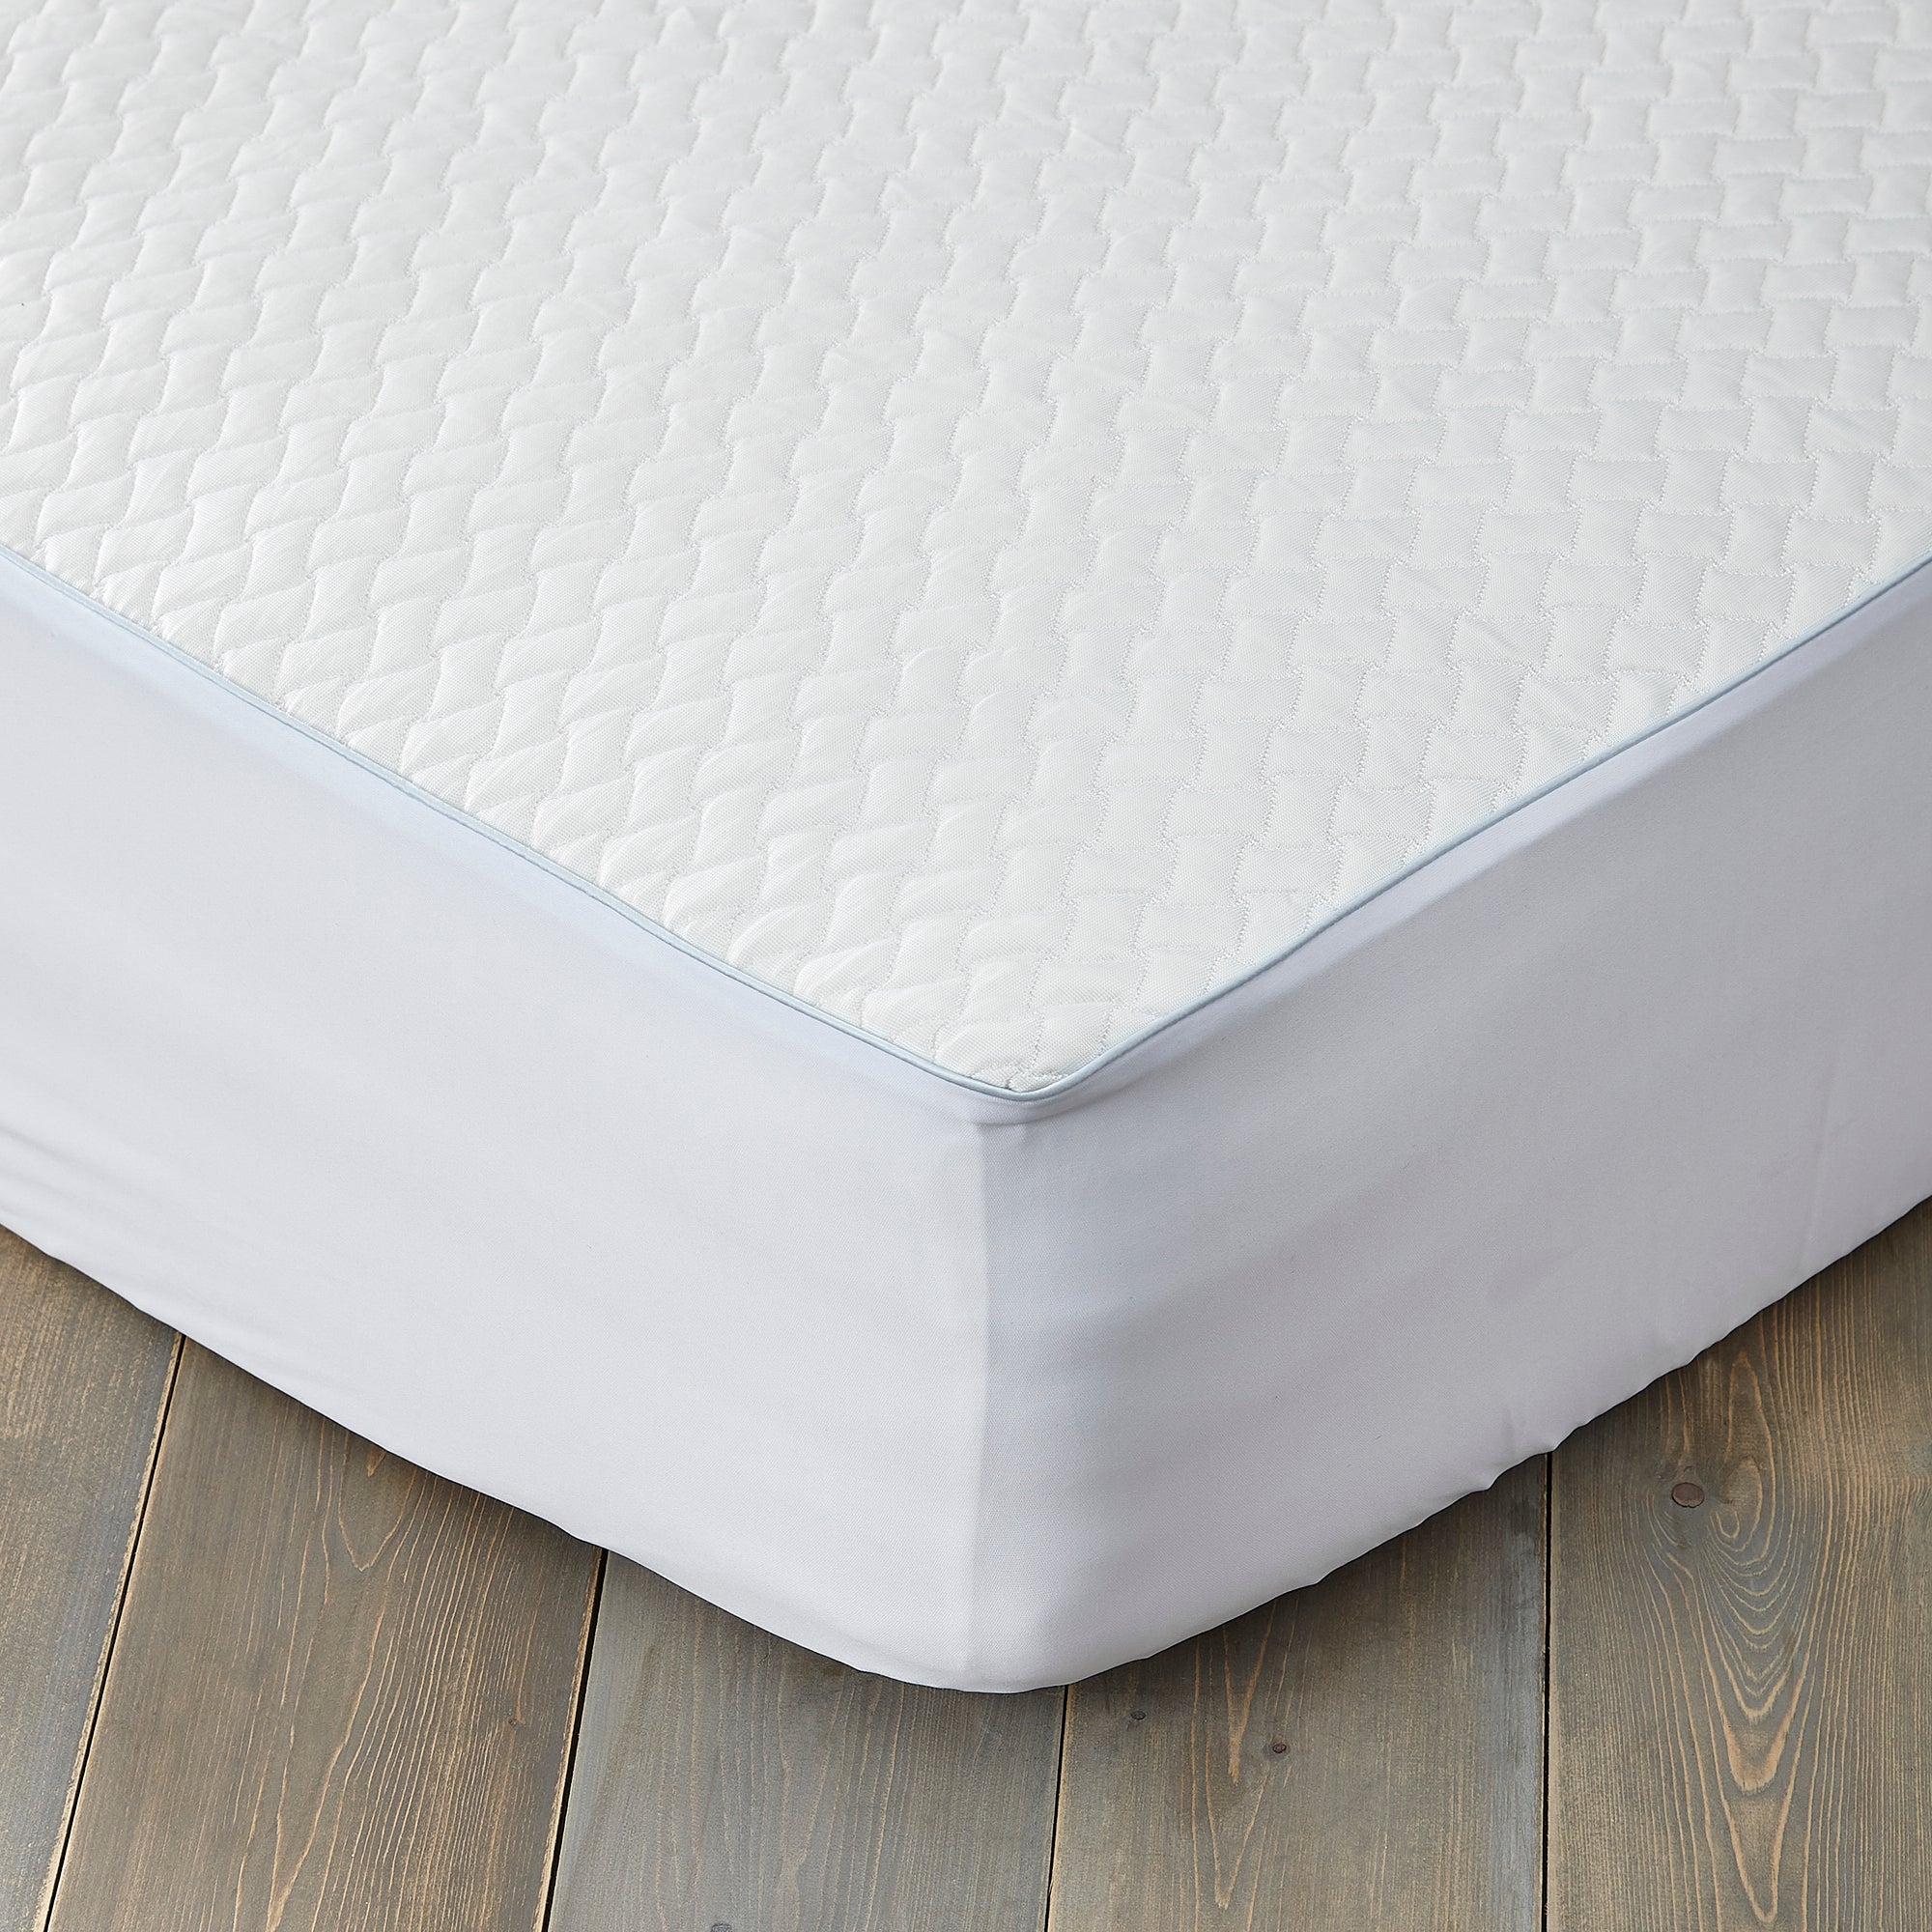 £17.50 for Fogarty miracool mattress protector white | deal-direct.co.uk